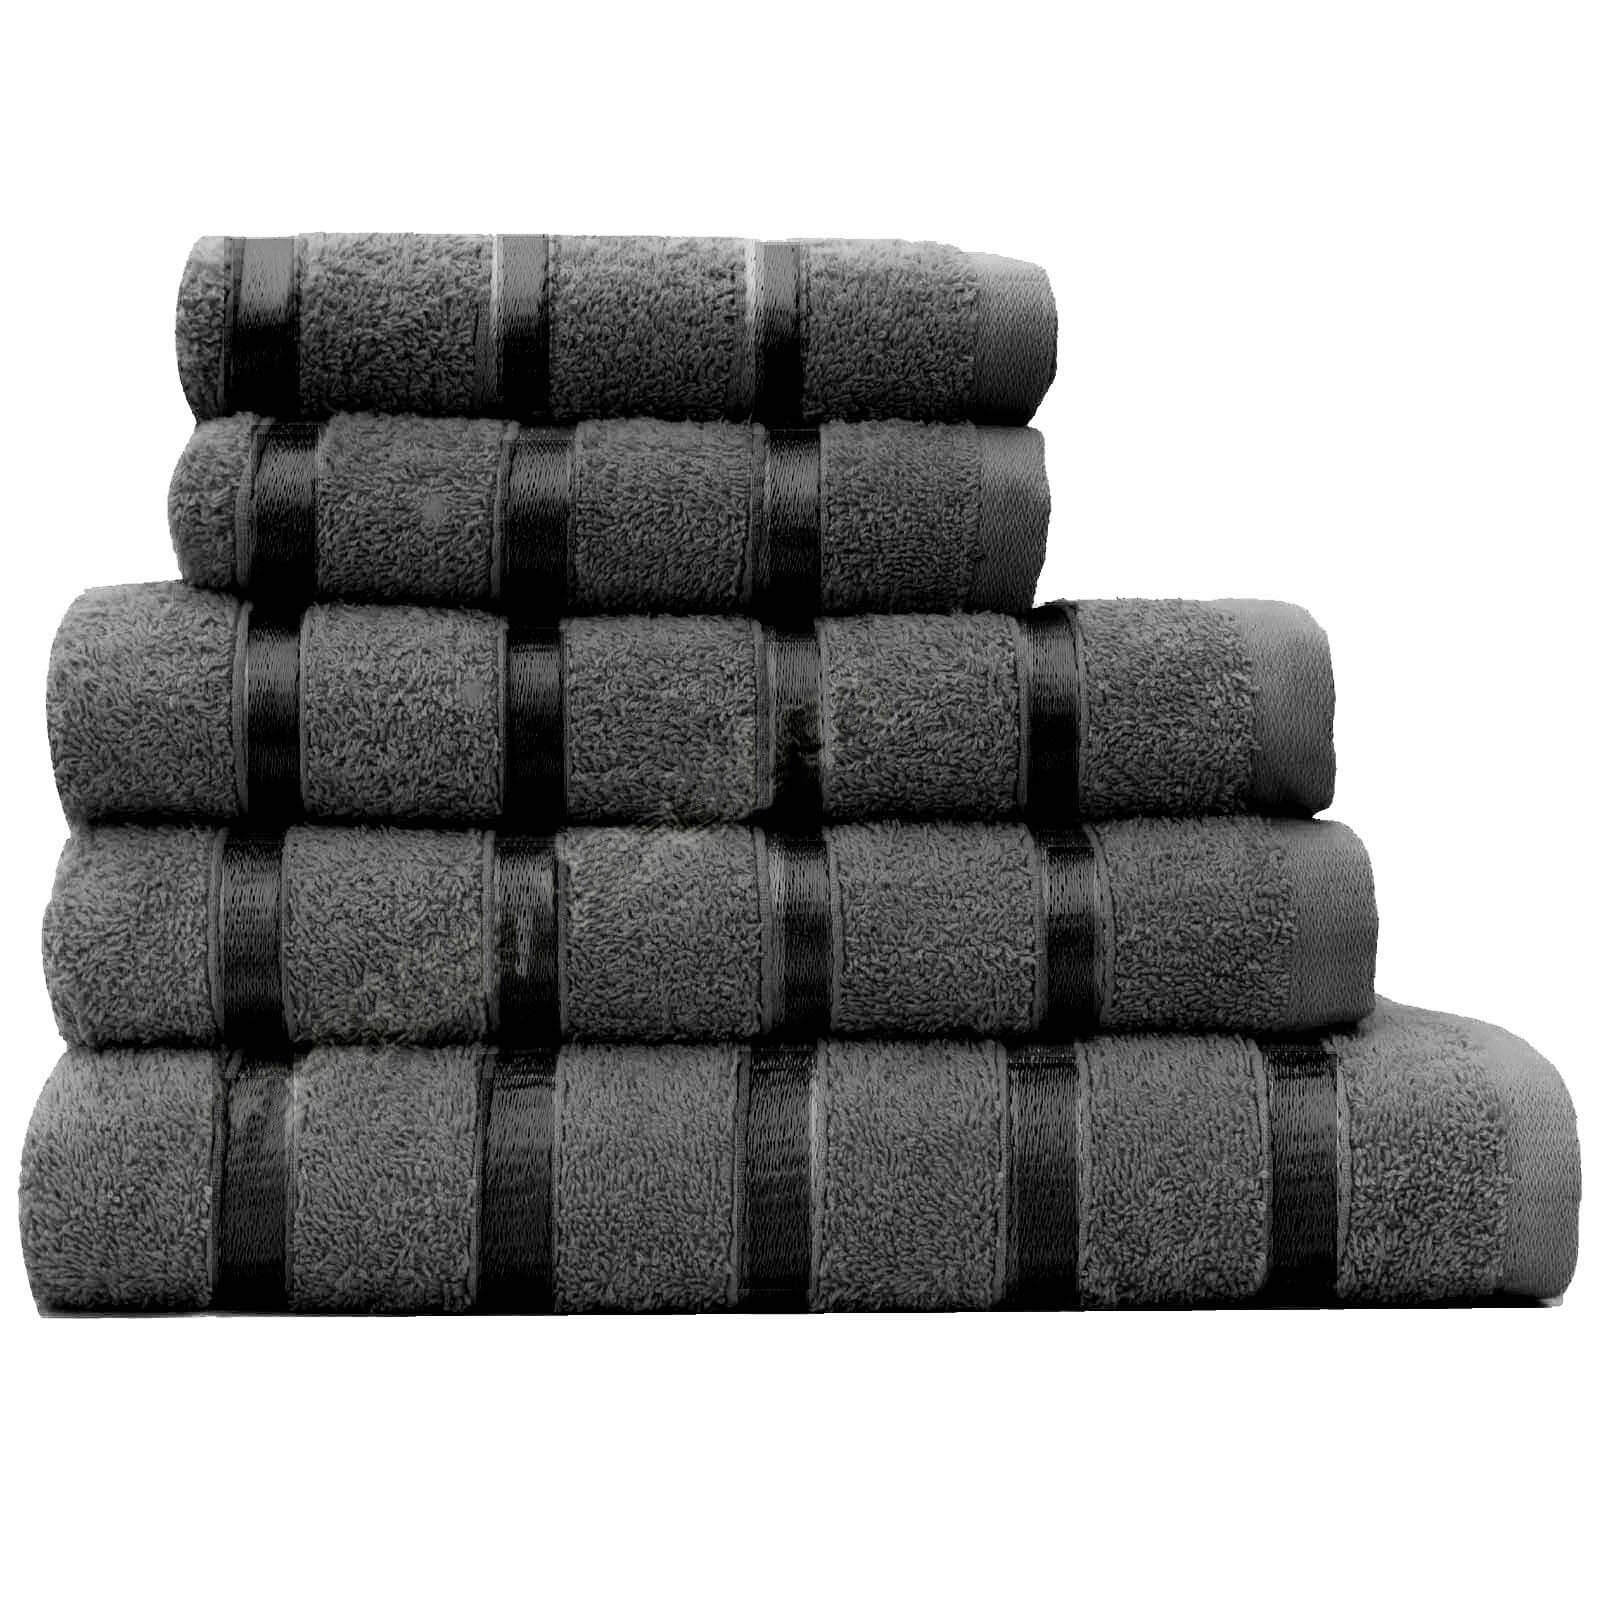 Egyptian Cotton Towel Set Black 80 X 140 cm Highly Absorbent 500gsm Pack of 4 Bath Towels 